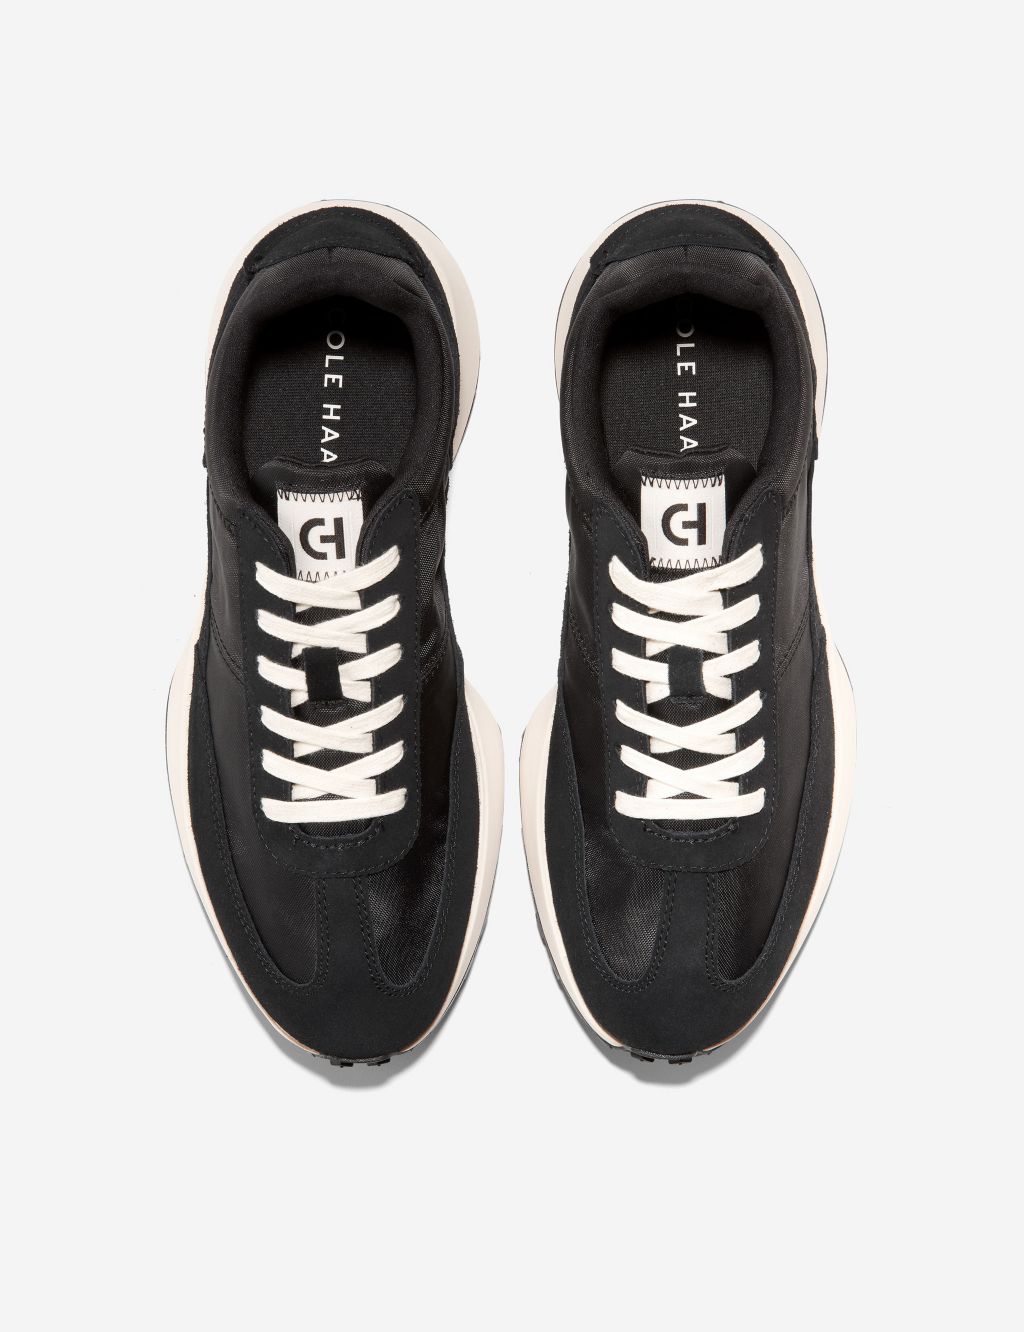 Grand Crosscourt Midtown Lace-Up Trainers image 4